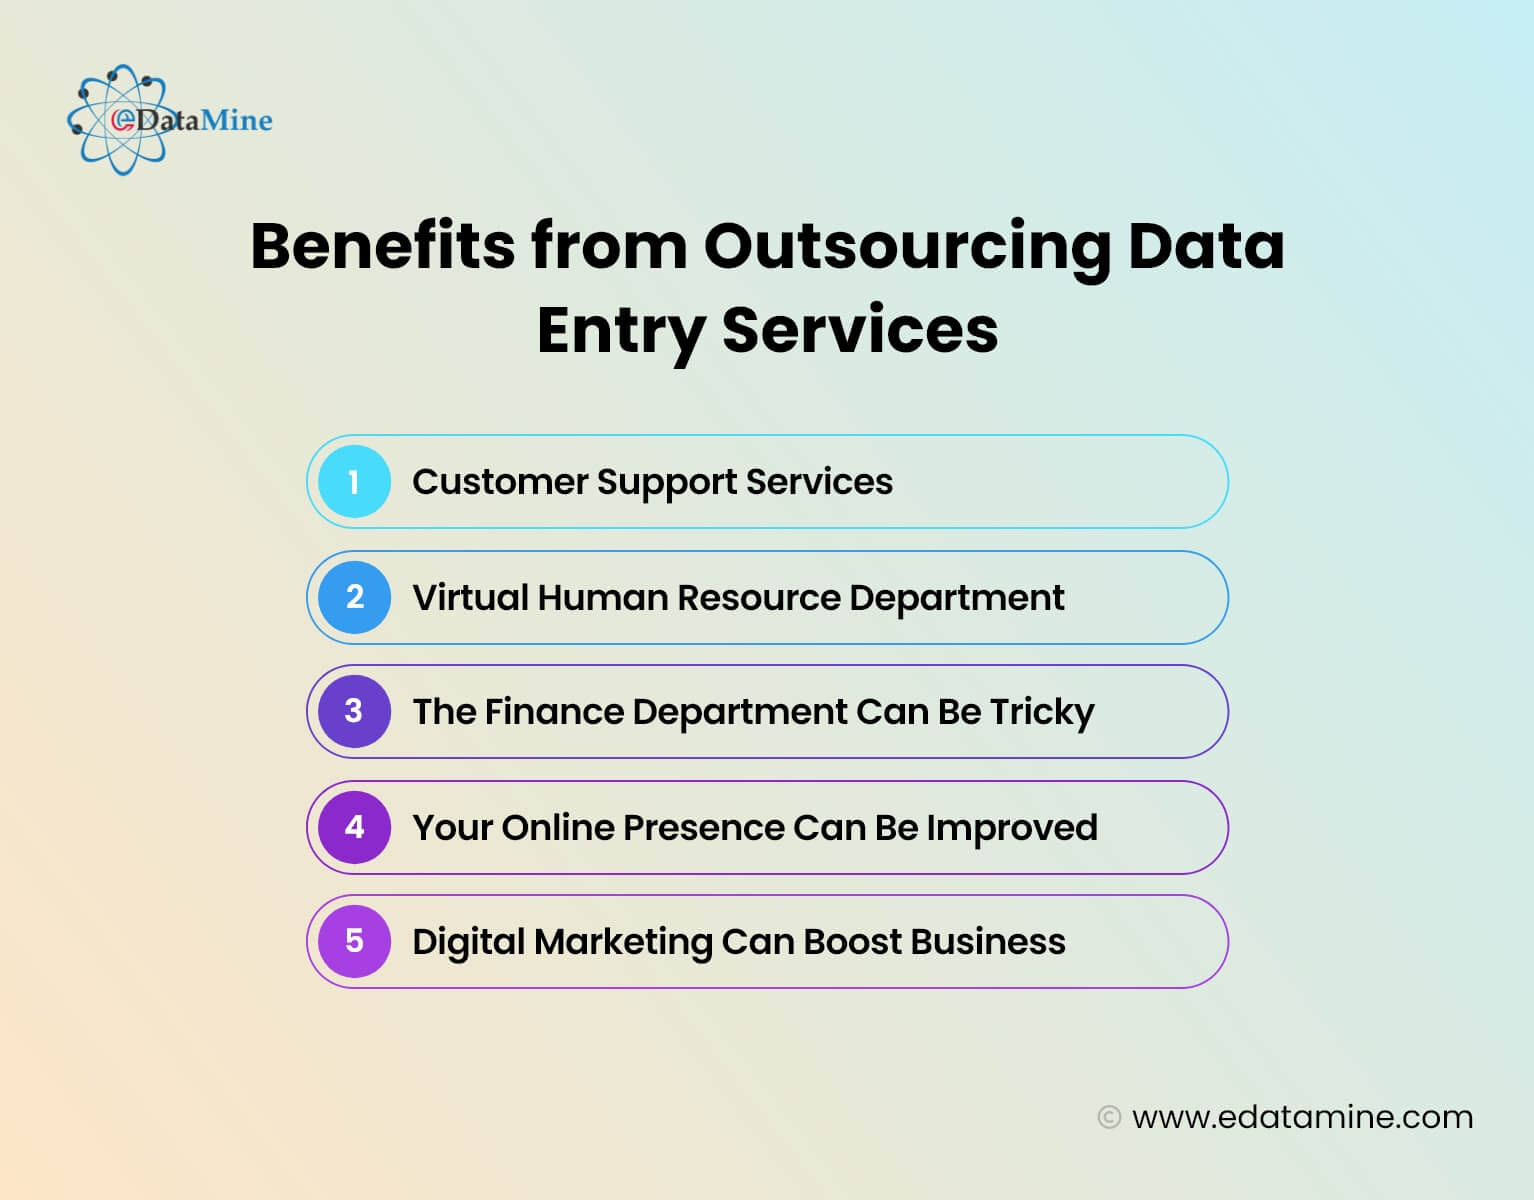 Benefits from Outsourcing Data Entry Services